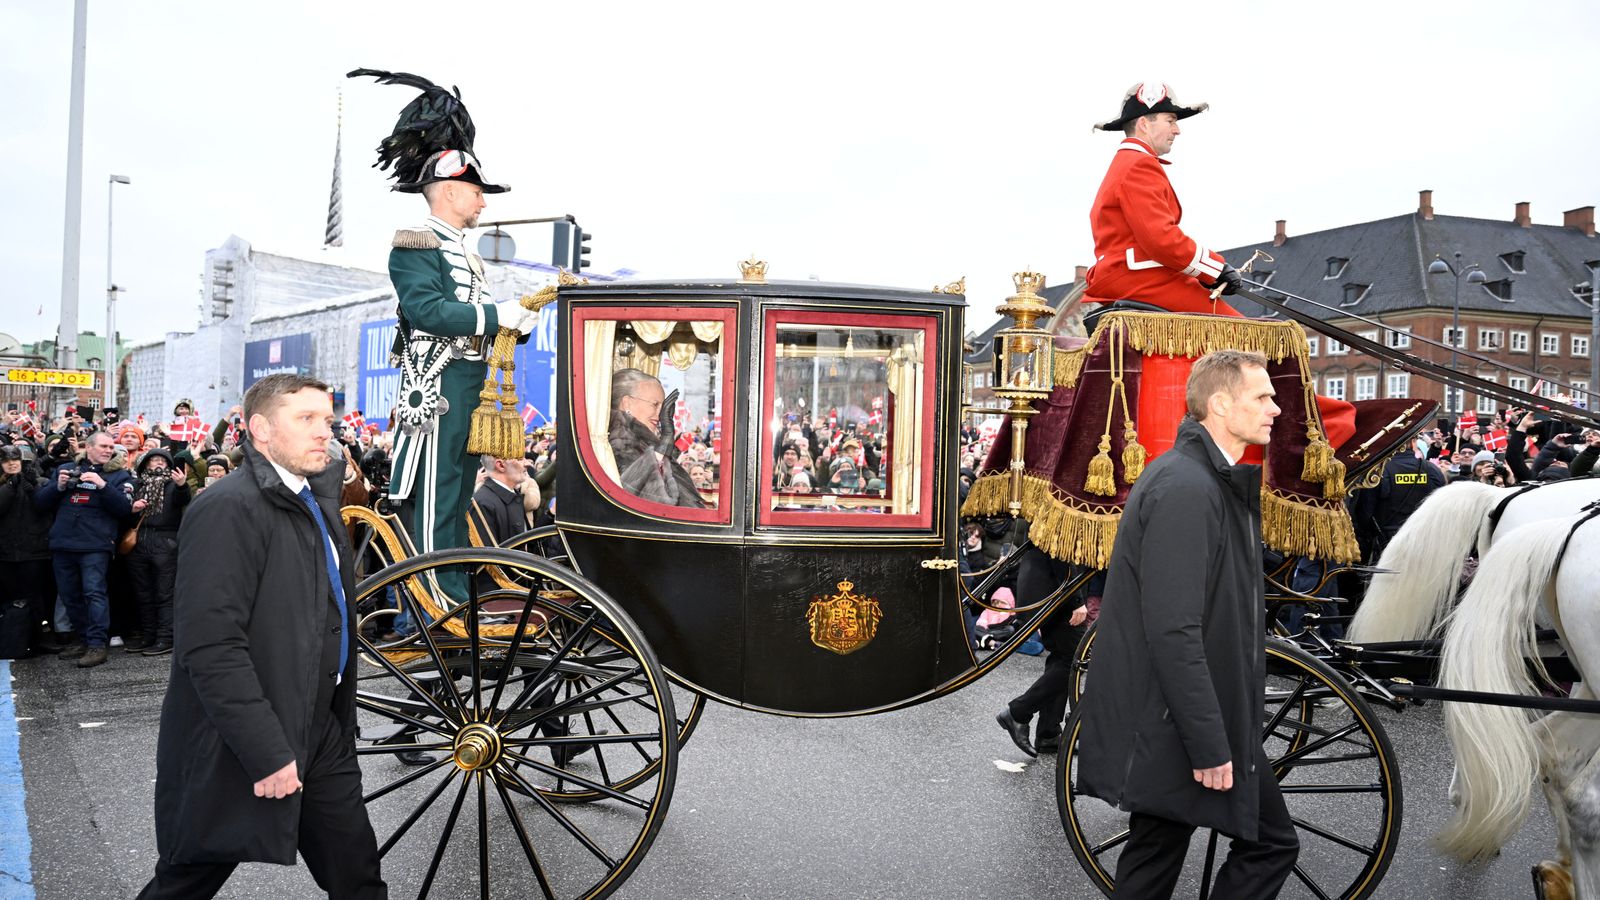 denmark has new king as queen abdicates in historic moment for europe’s oldest monarchy